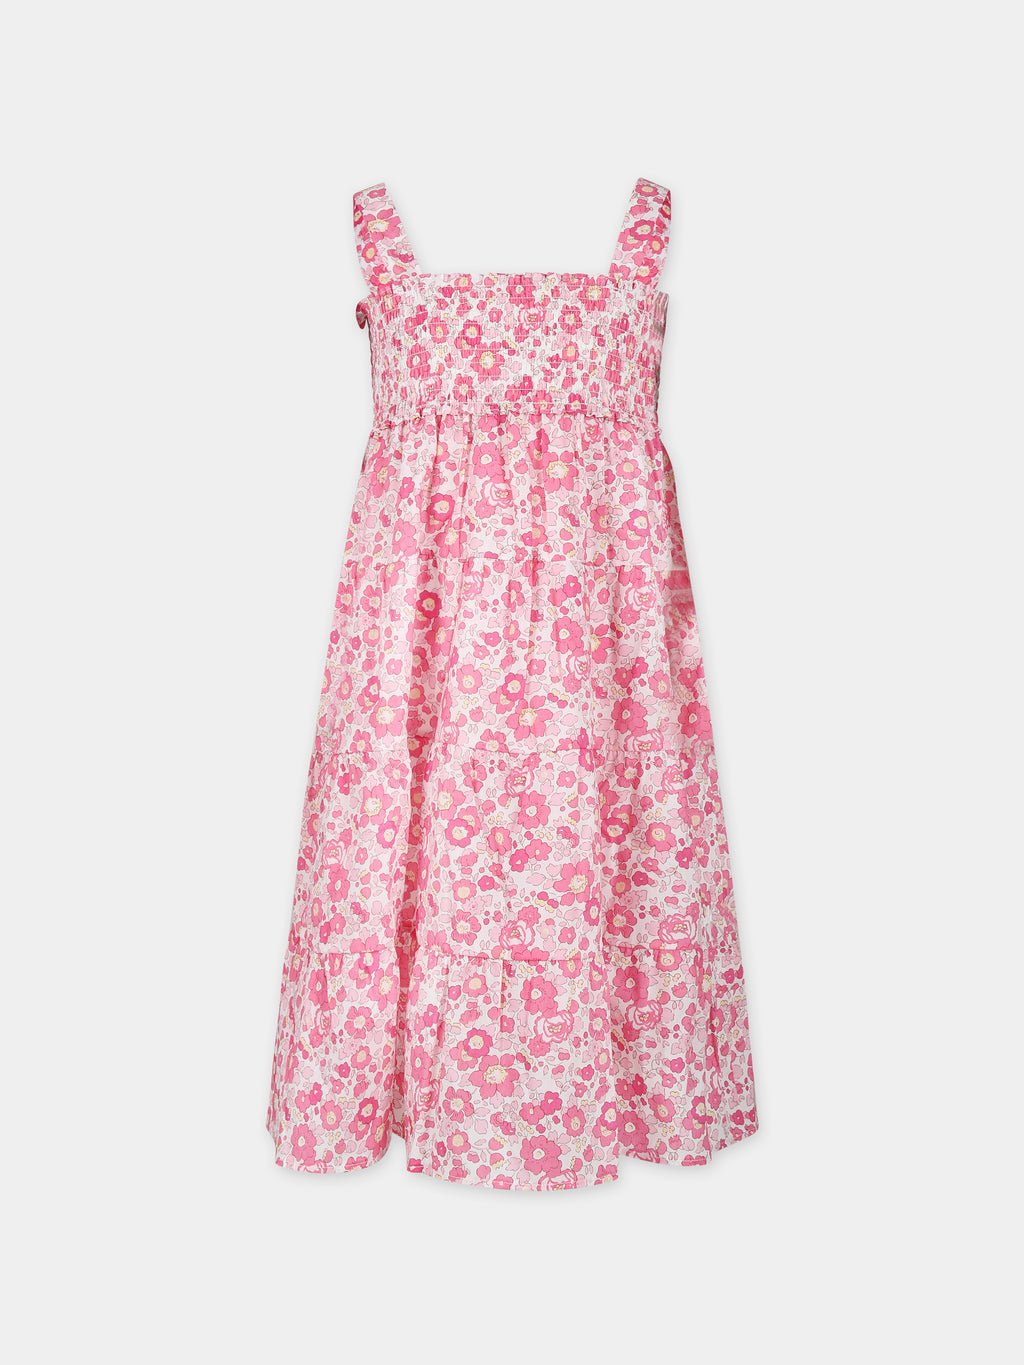 Pink dress for girl with flower print